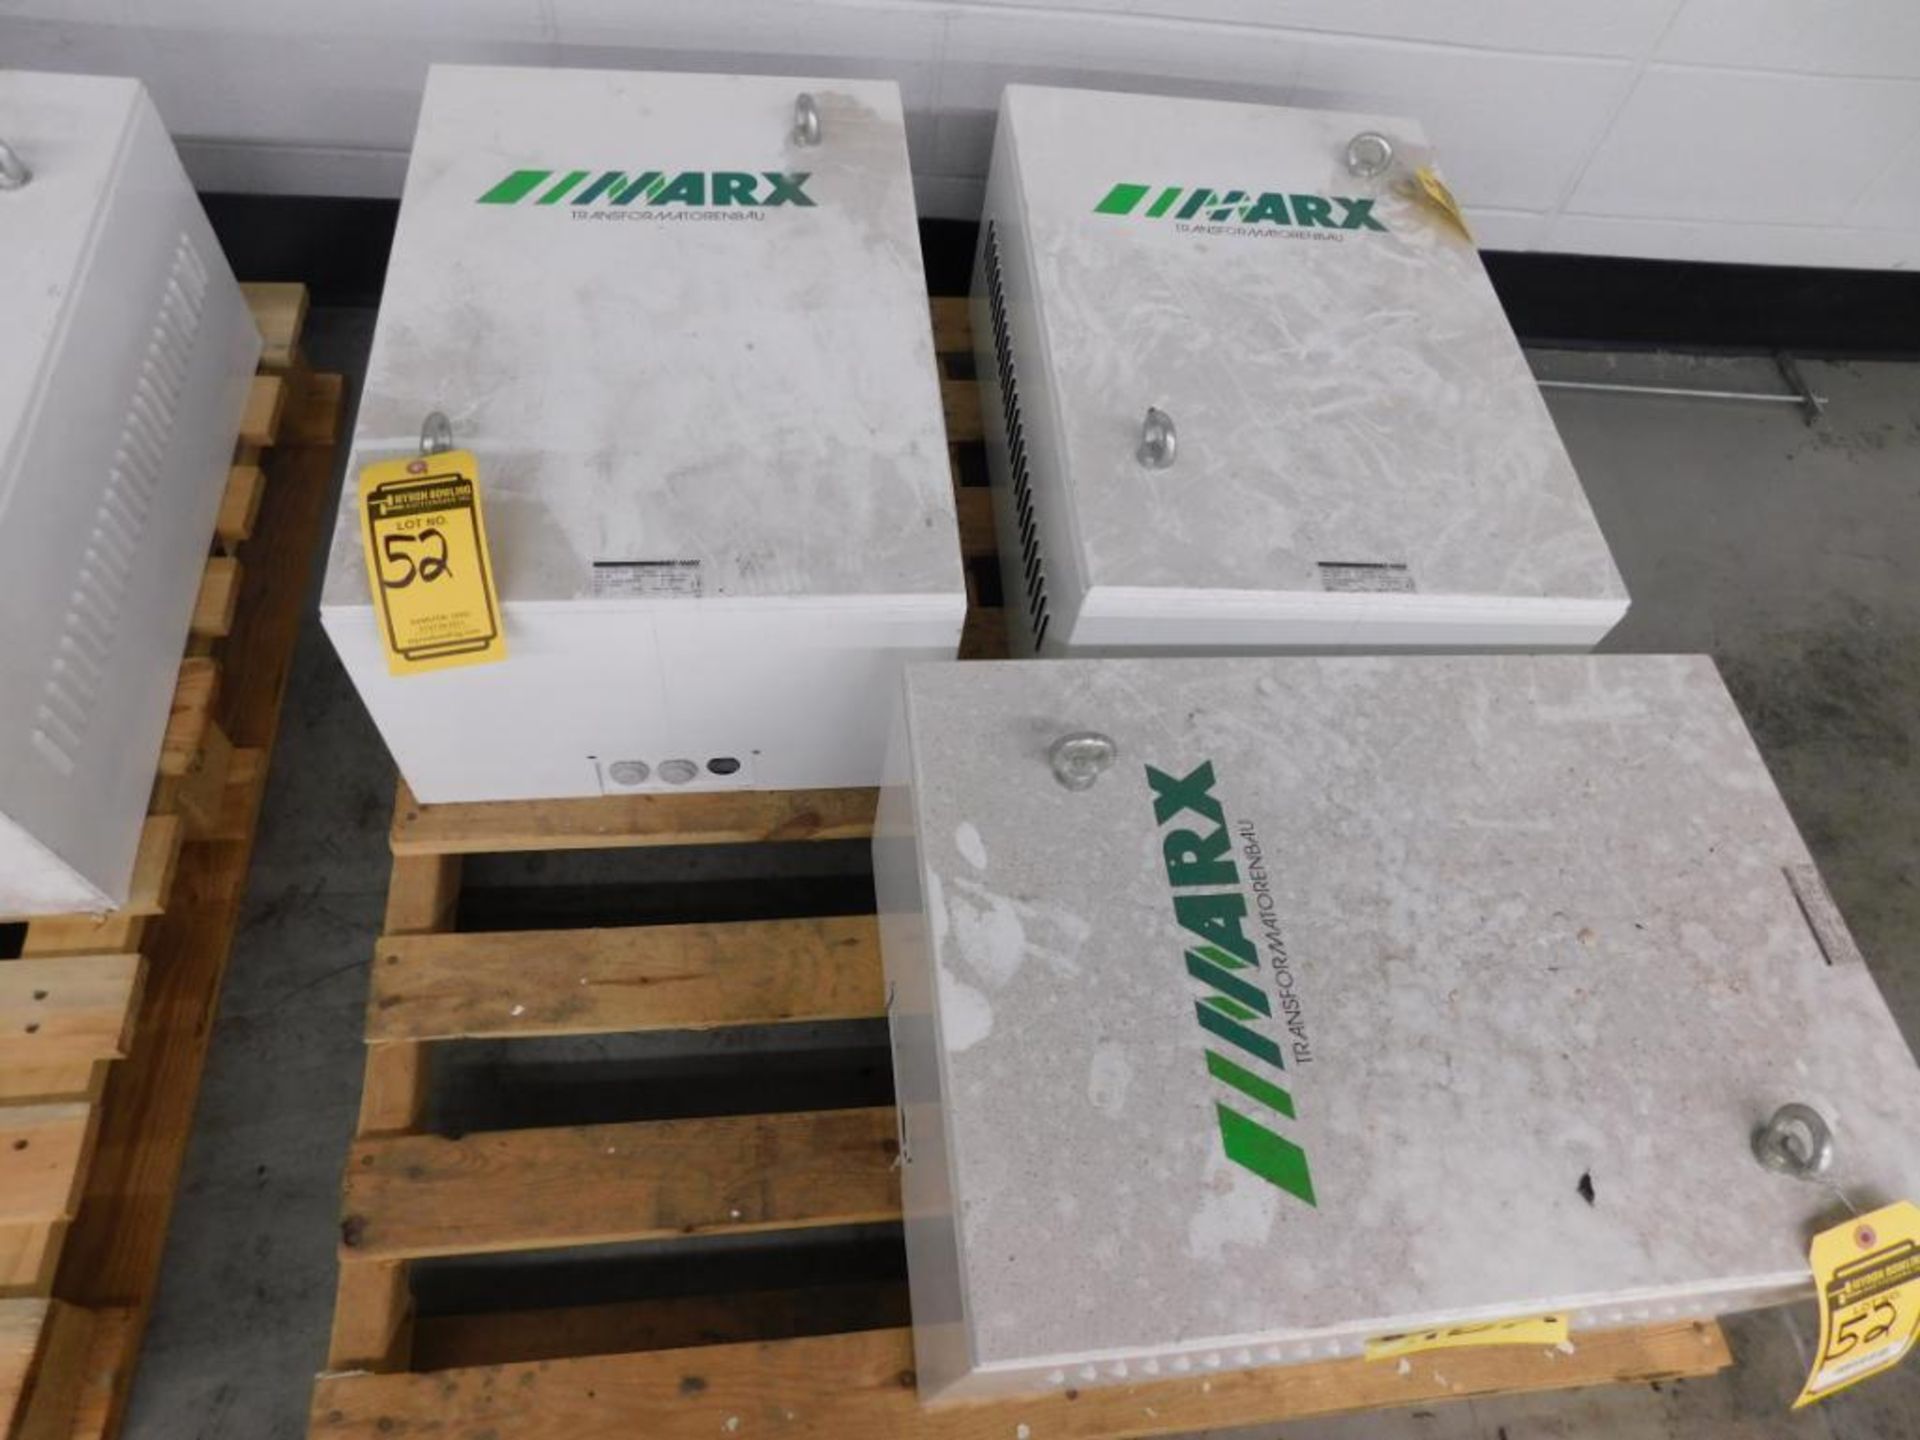 (3) MARX 55 KVA TRANSFORMERS, 3-PH, 3X440/460/480 PRIMARY VOLTS, 3X400 SECONDARY VOLTS - Image 2 of 2